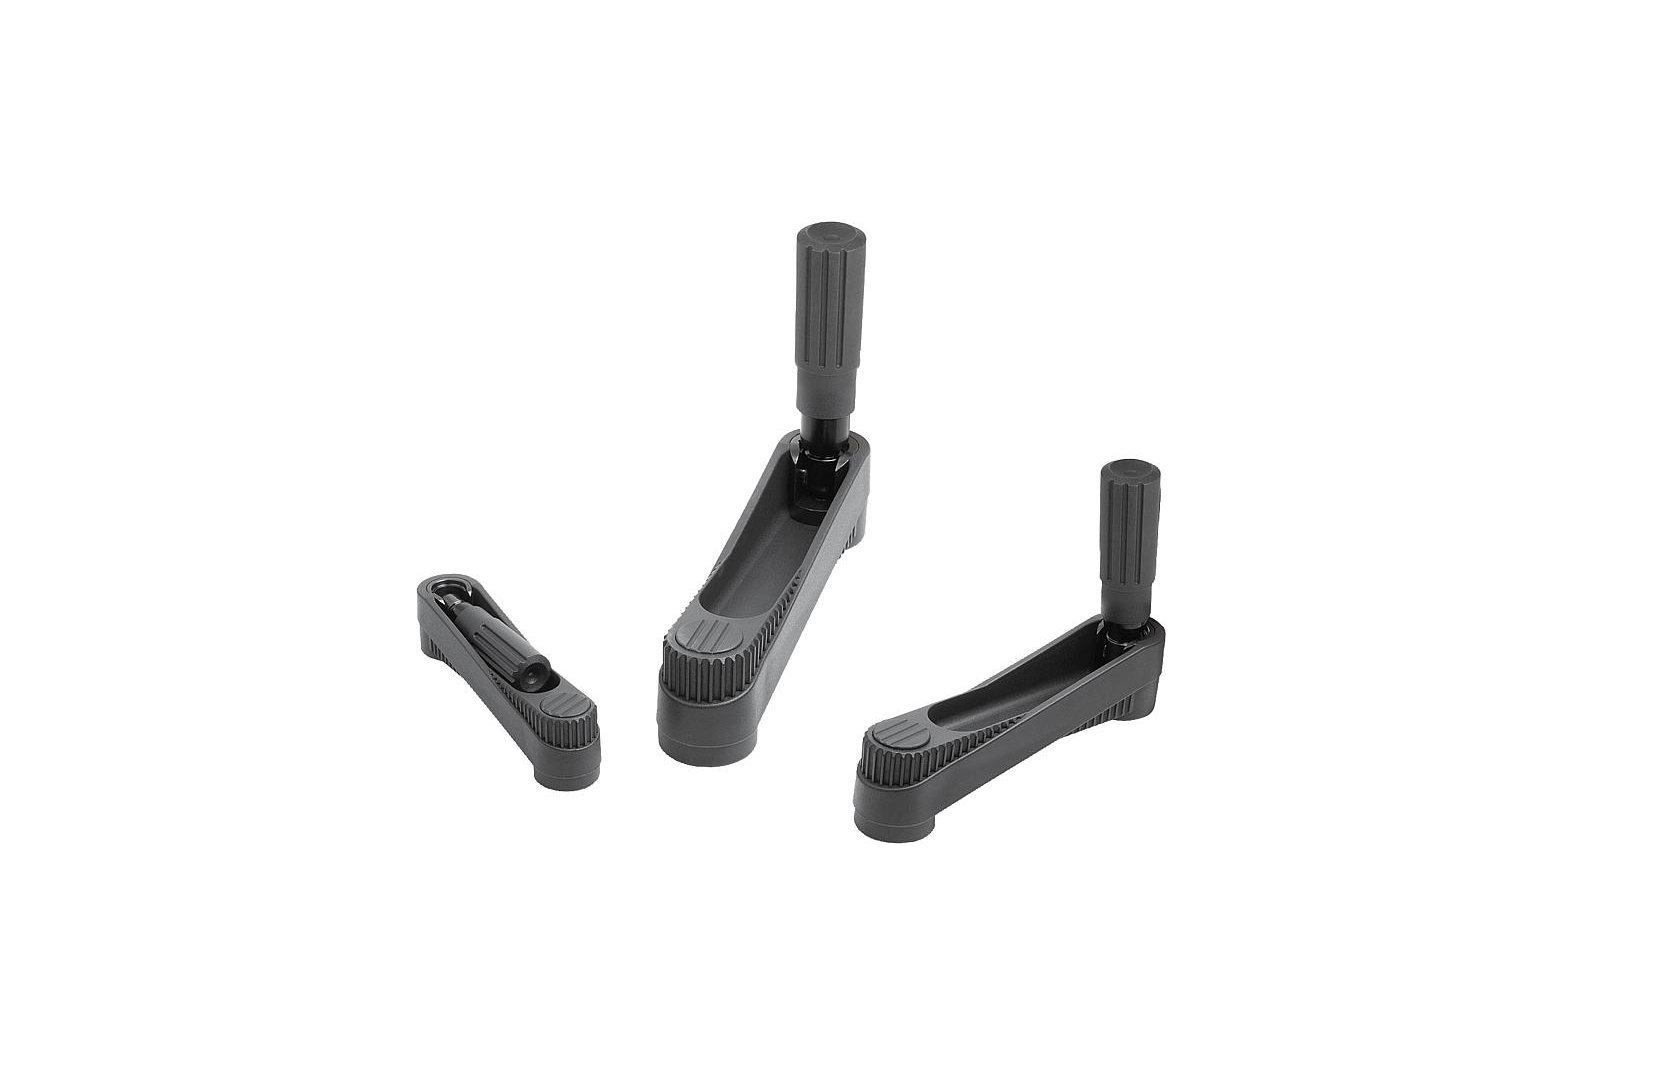 K0268 Crank handles with safety grip